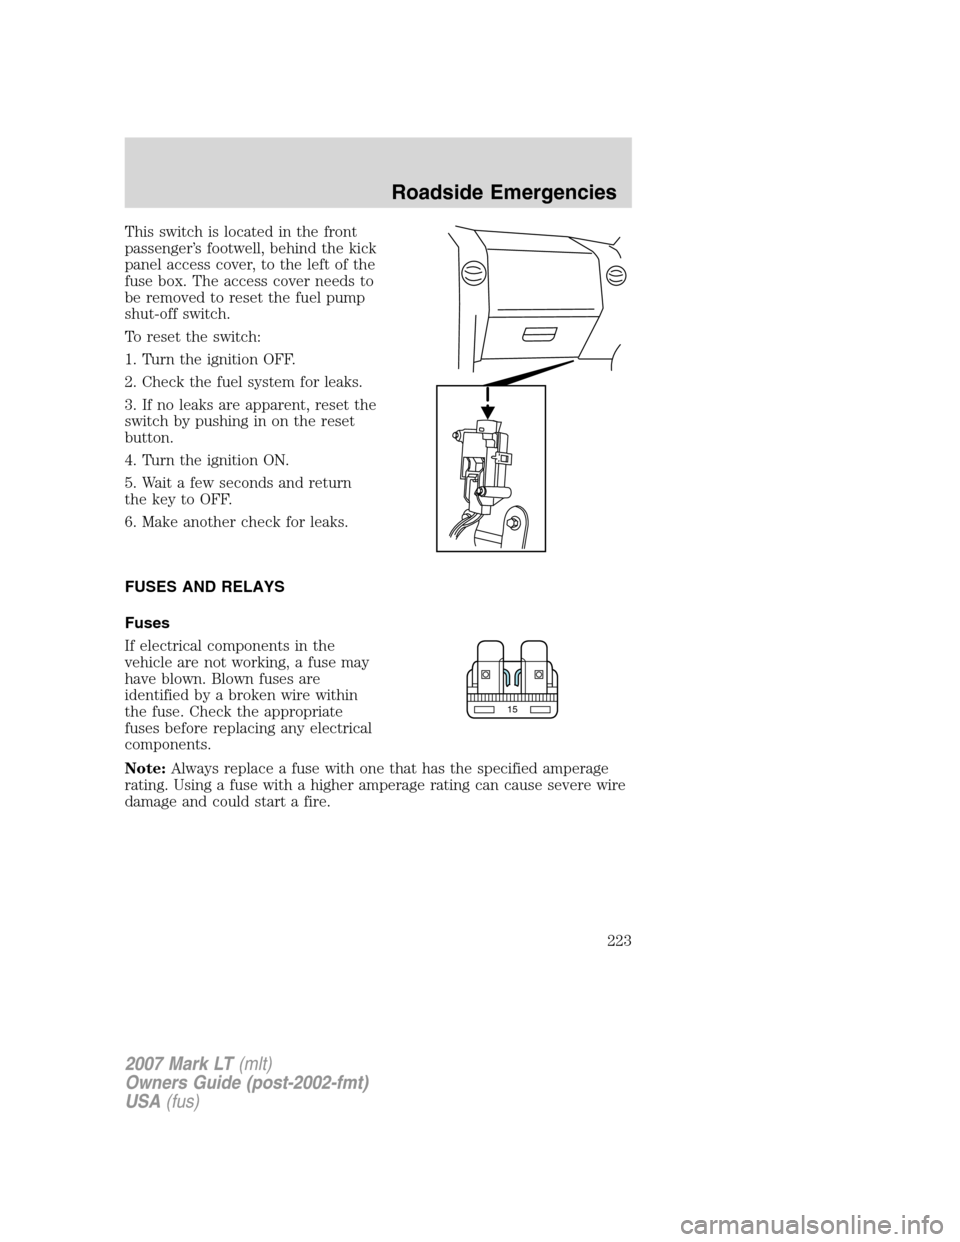 LINCOLN MARK LT 2007  Owners Manual This switch is located in the front
passenger’s footwell, behind the kick
panel access cover, to the left of the
fuse box. The access cover needs to
be removed to reset the fuel pump
shut-off switch